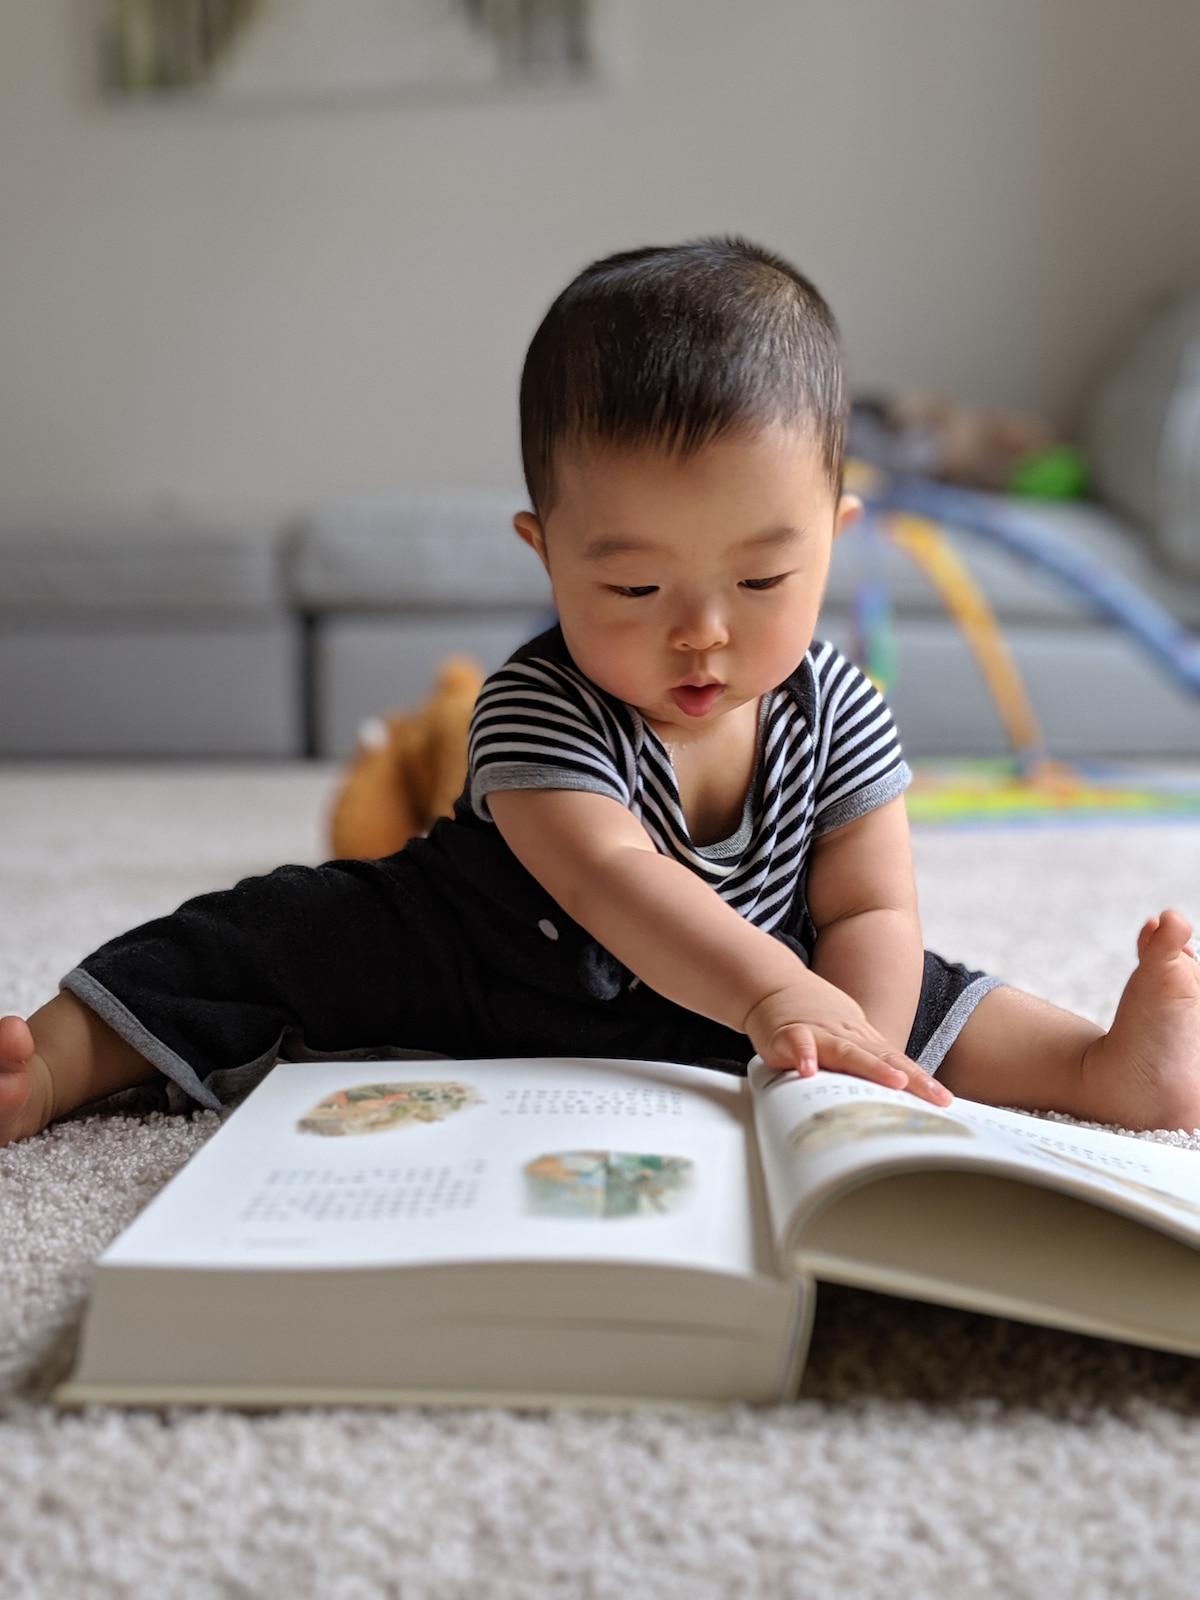 Baby Looking at a Book